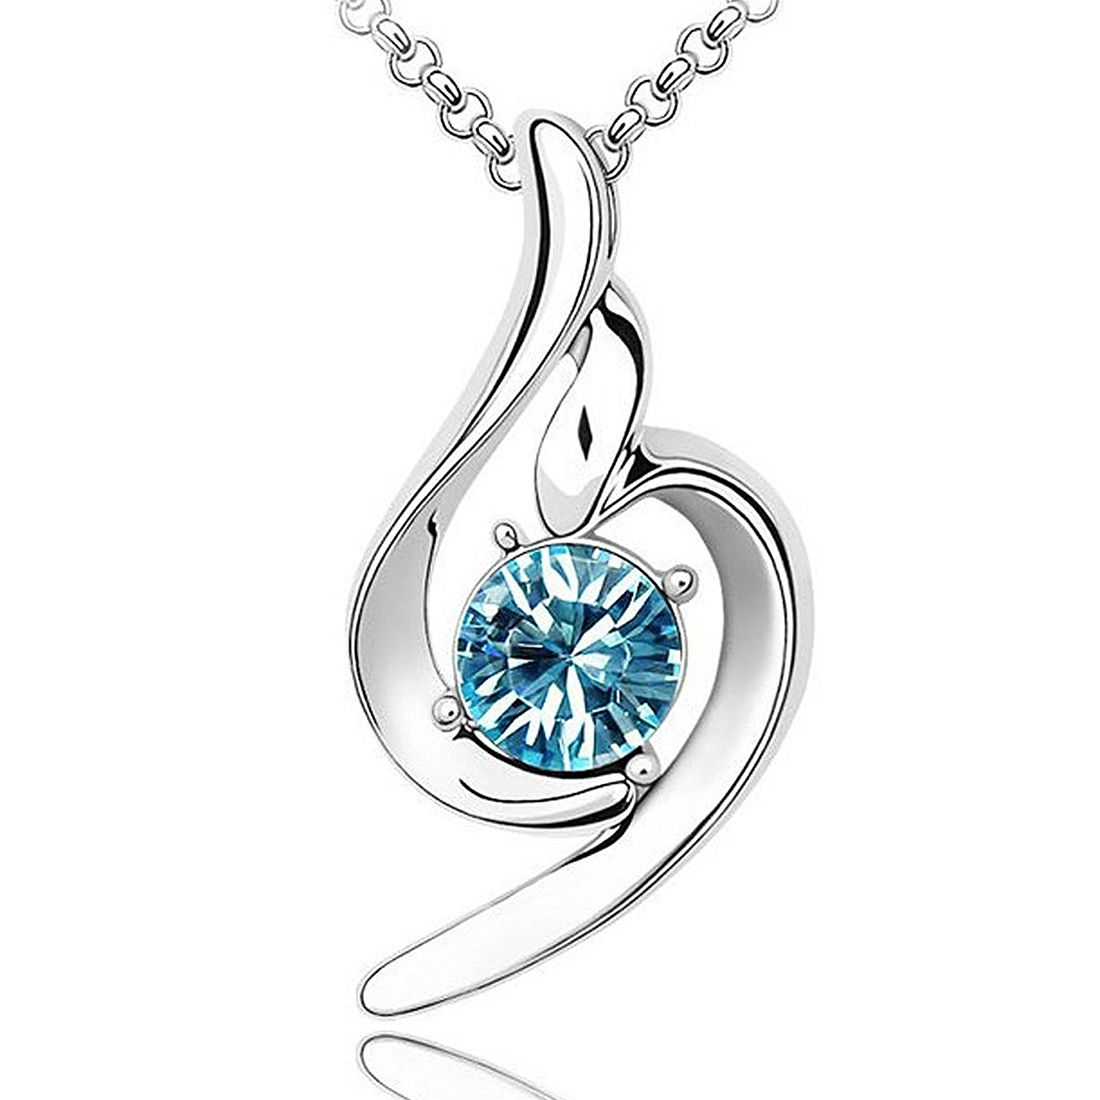 Floating Solitaire Pendant in 18K White Gold | Brilliant Earth